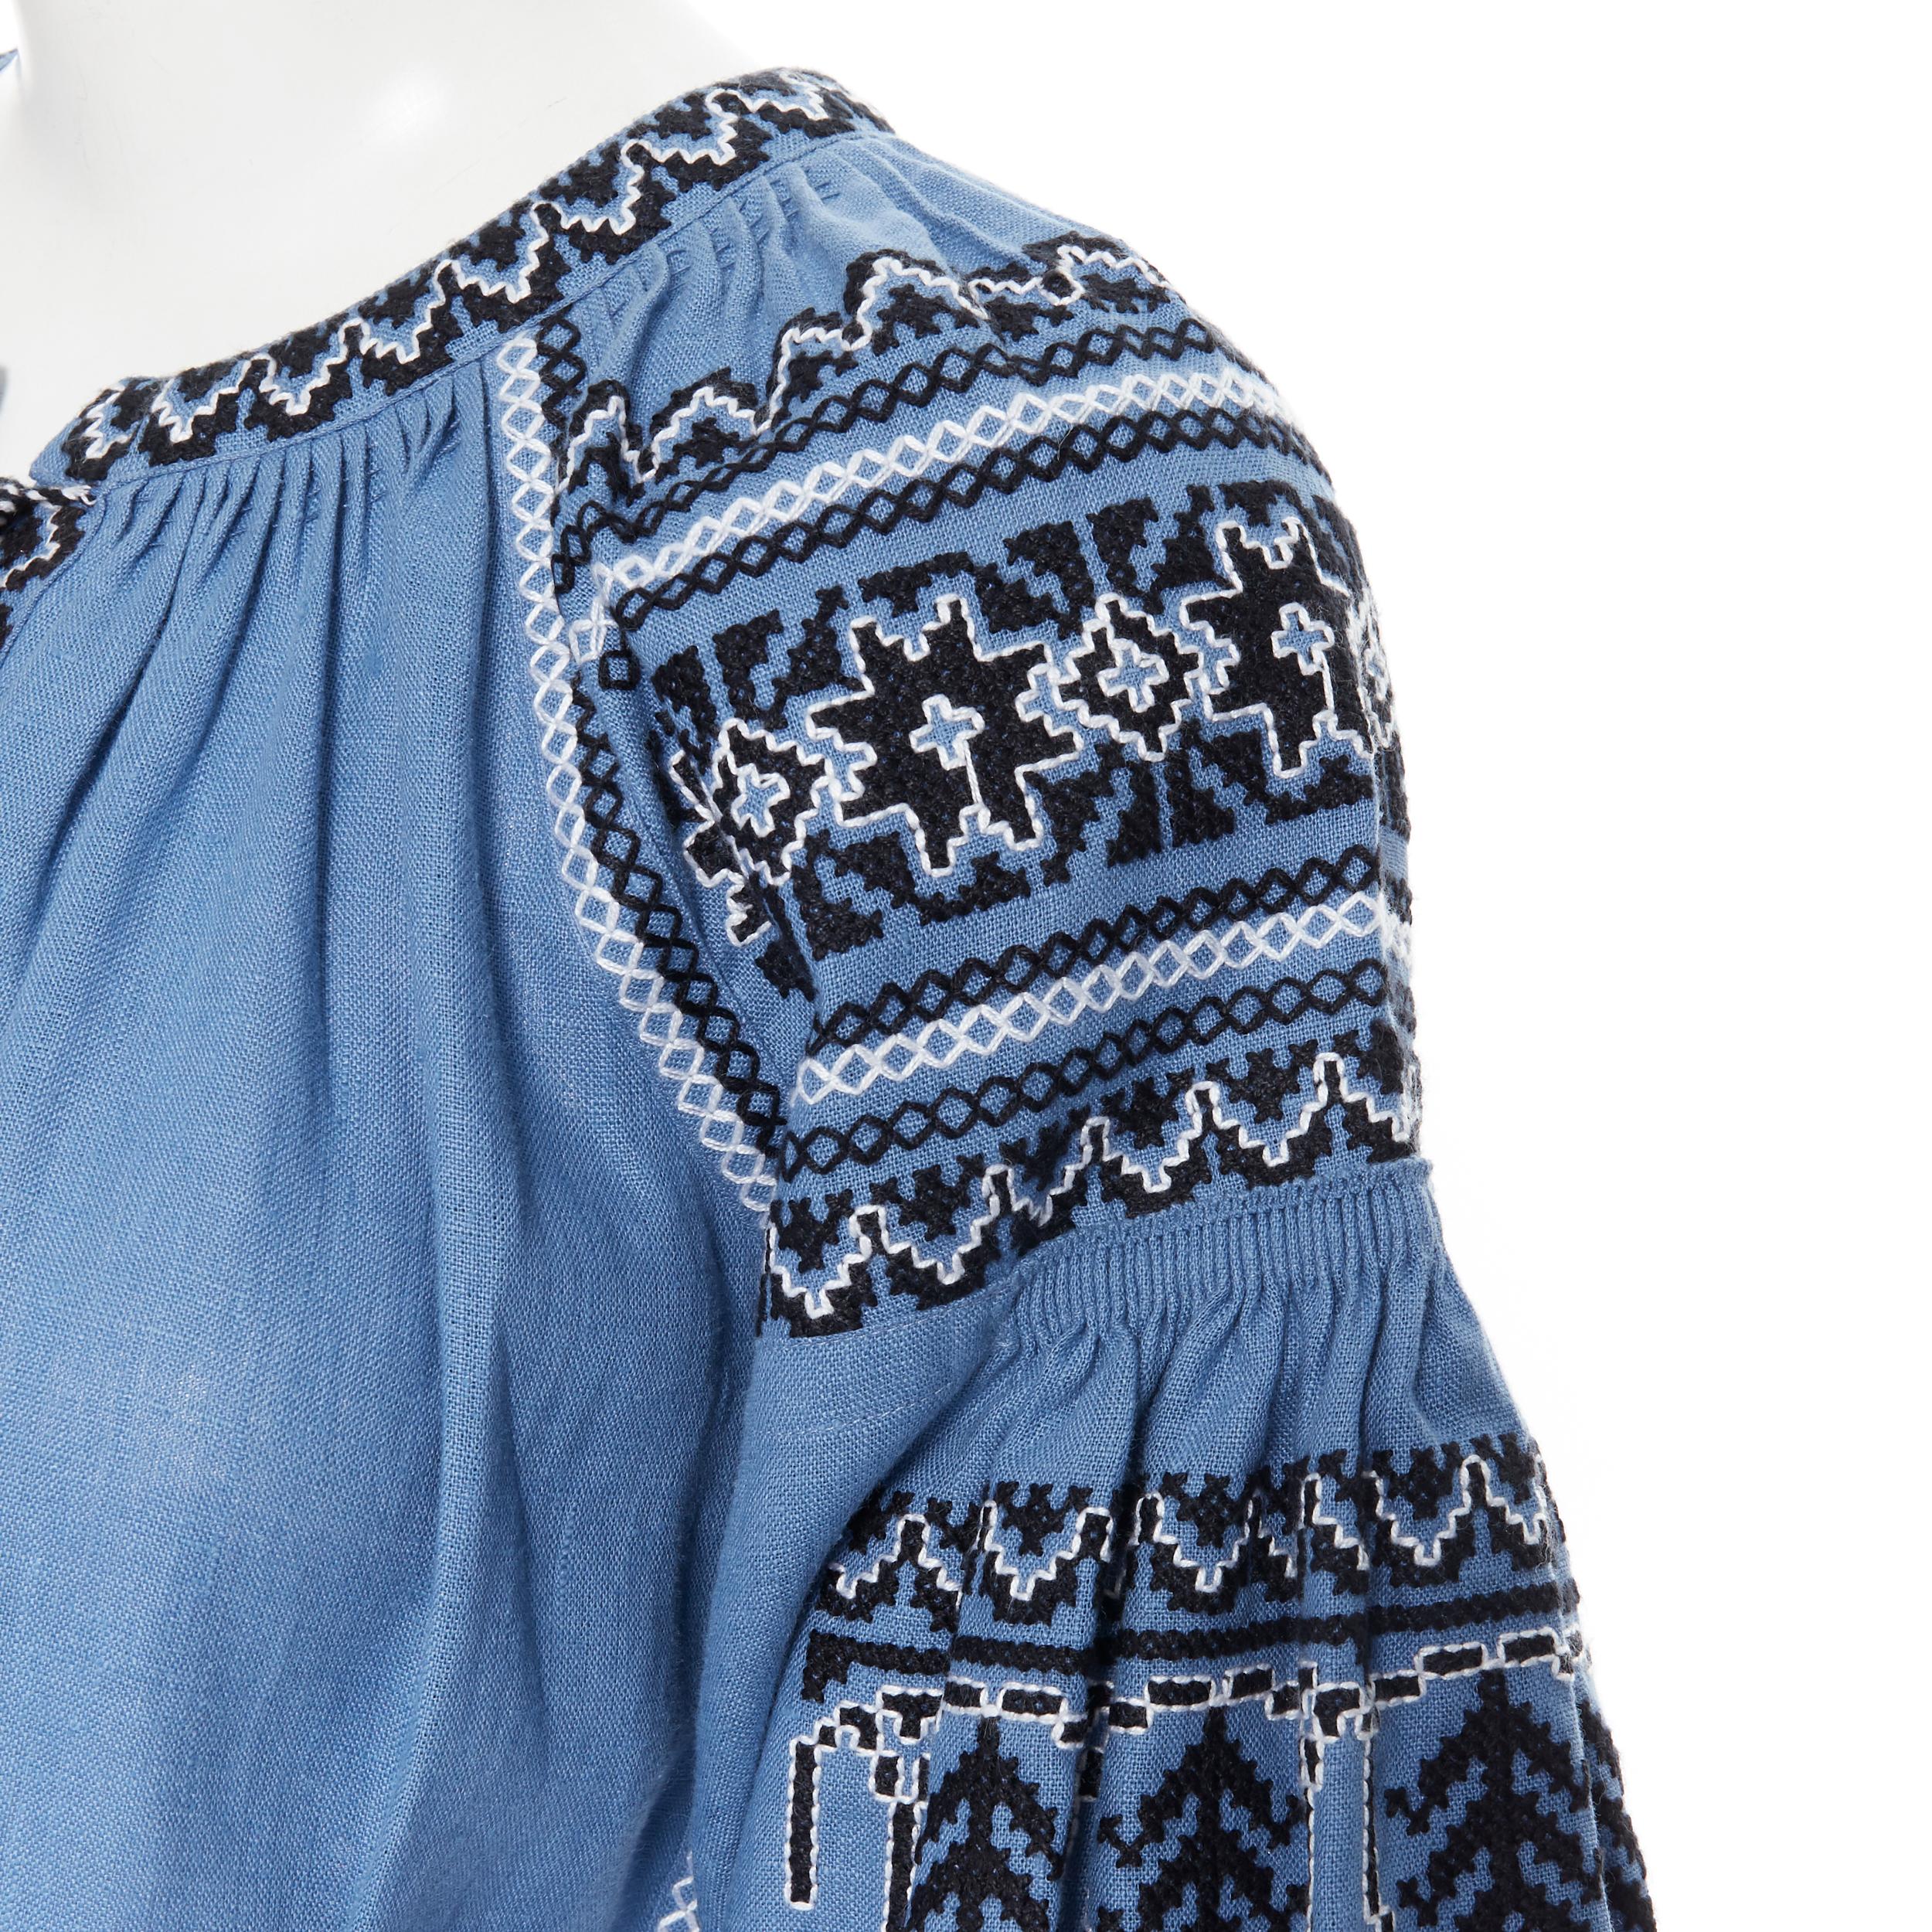 VITA KIN blue linen black white ethnic embroidered puff sleeve belted dress XS
Brand: Vita Kin
Model Name / Style: Ethnic dress
Material: Linen
Color: Blue
Pattern: Geometric
Extra Detail: Pom Pom tie front closure. Voluminous puff sleeves. Button